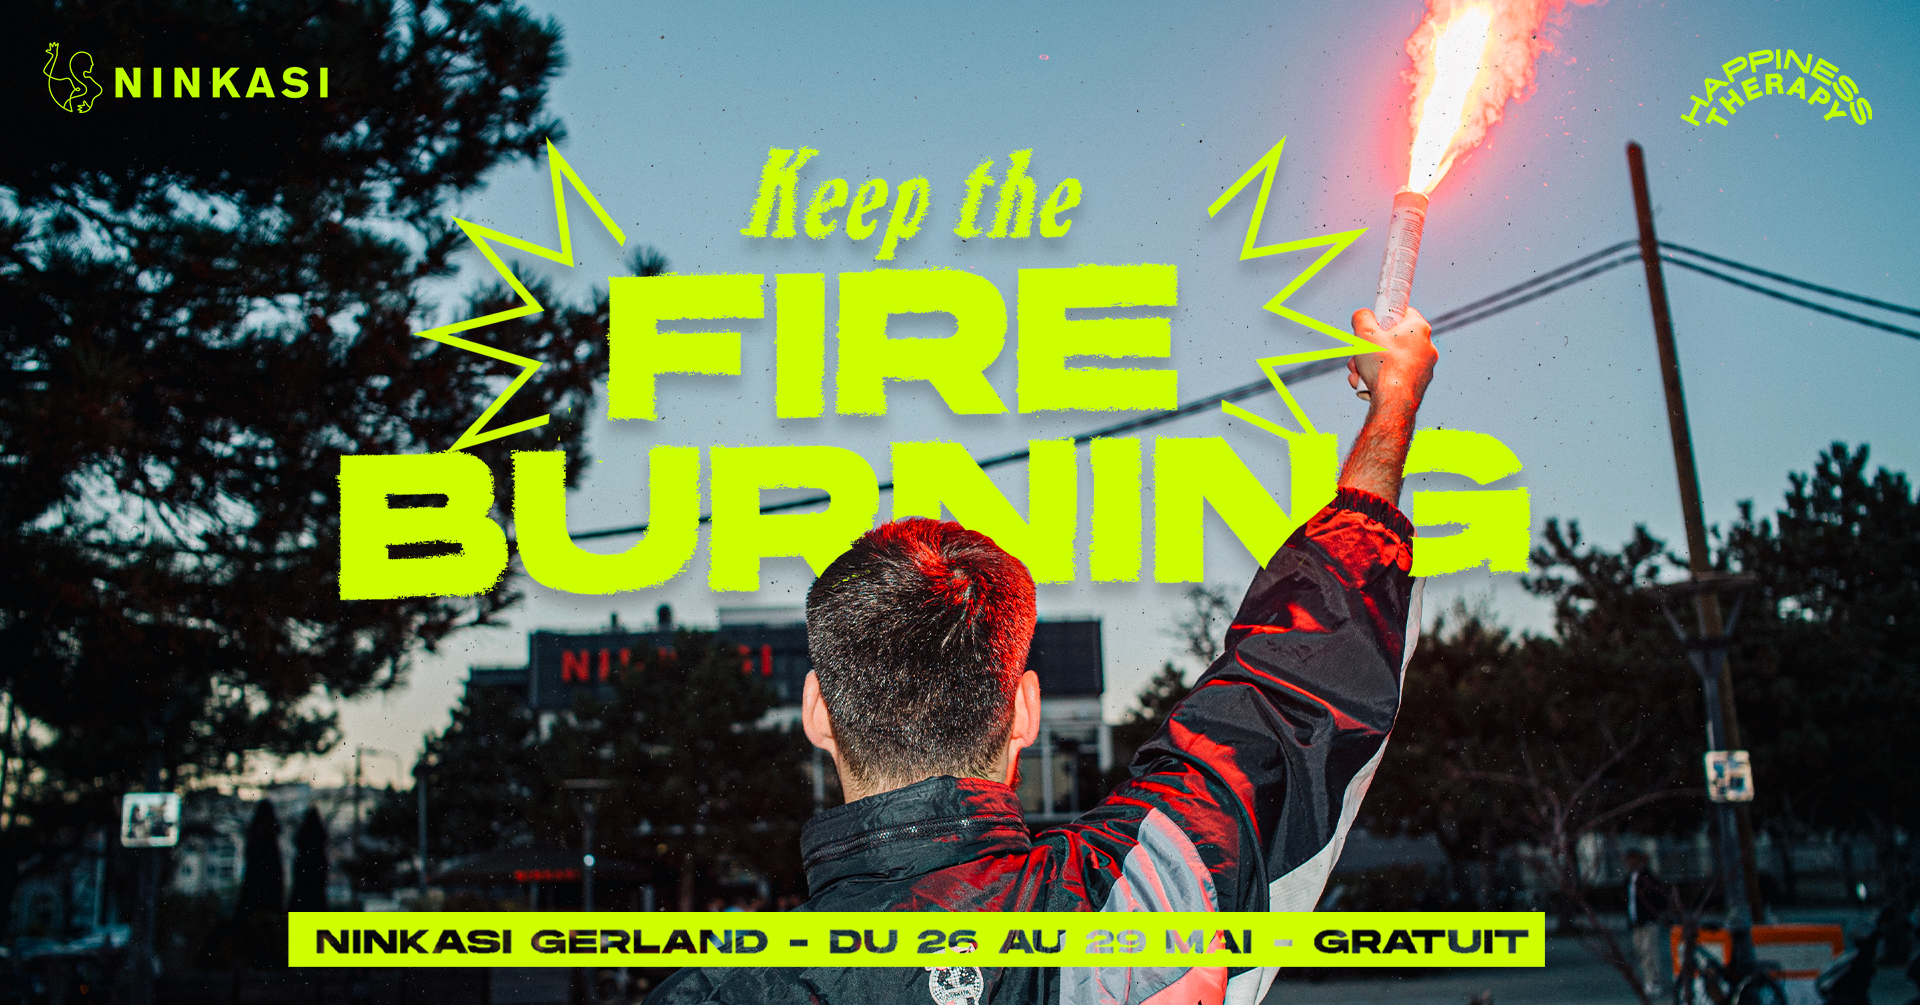 Open Air Gratuit • Happiness Therapy x Ninkasi: Keep The Fire Burning - Página frontal